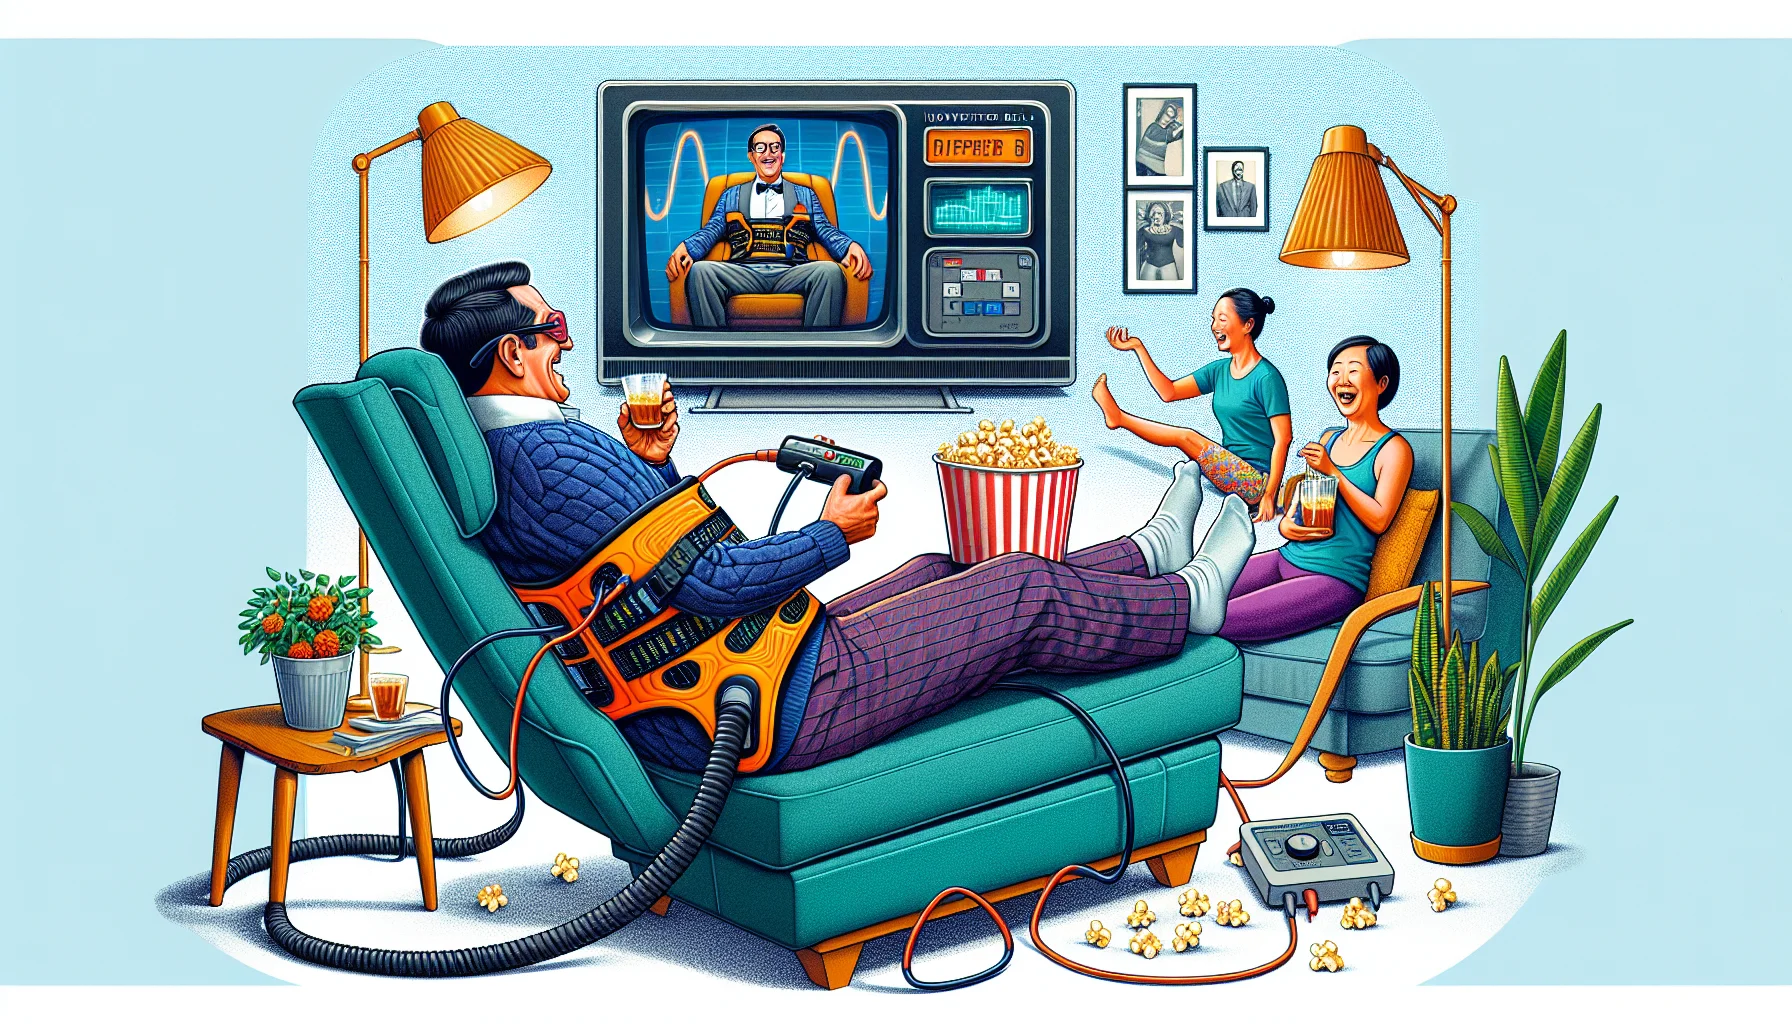 Create a comedic illustration showcasing an innovative fitness belt. This belt has a futuristic design with attached control panel and wires showing its high-tech nature. The belt users get a gentle shock as it helps to reduce abdominal fat. One middle-aged Caucasian male is using it while reclining comfortably on a lounger, eating popcorn and watching an old comedy show on television. His Asian female partner is also using the belt, but she's doing yoga, laughing at the absurdity of the situation. Both are in a brightly lit living room. Ensure the scene connotes a whimsical way to encourage exercise.